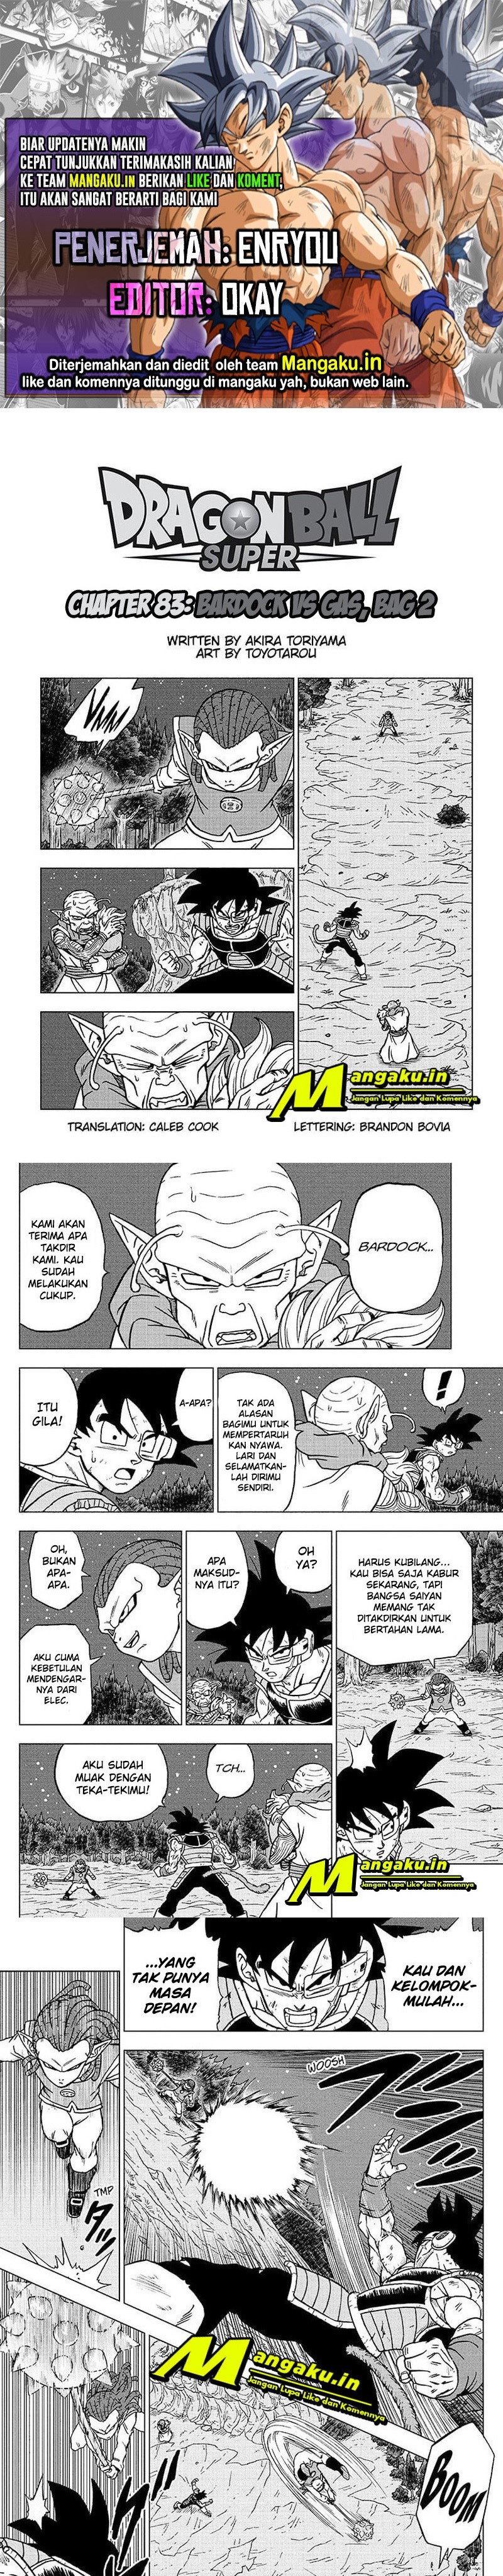 Dragon Ball Super: Chapter 83.1 - Page 1